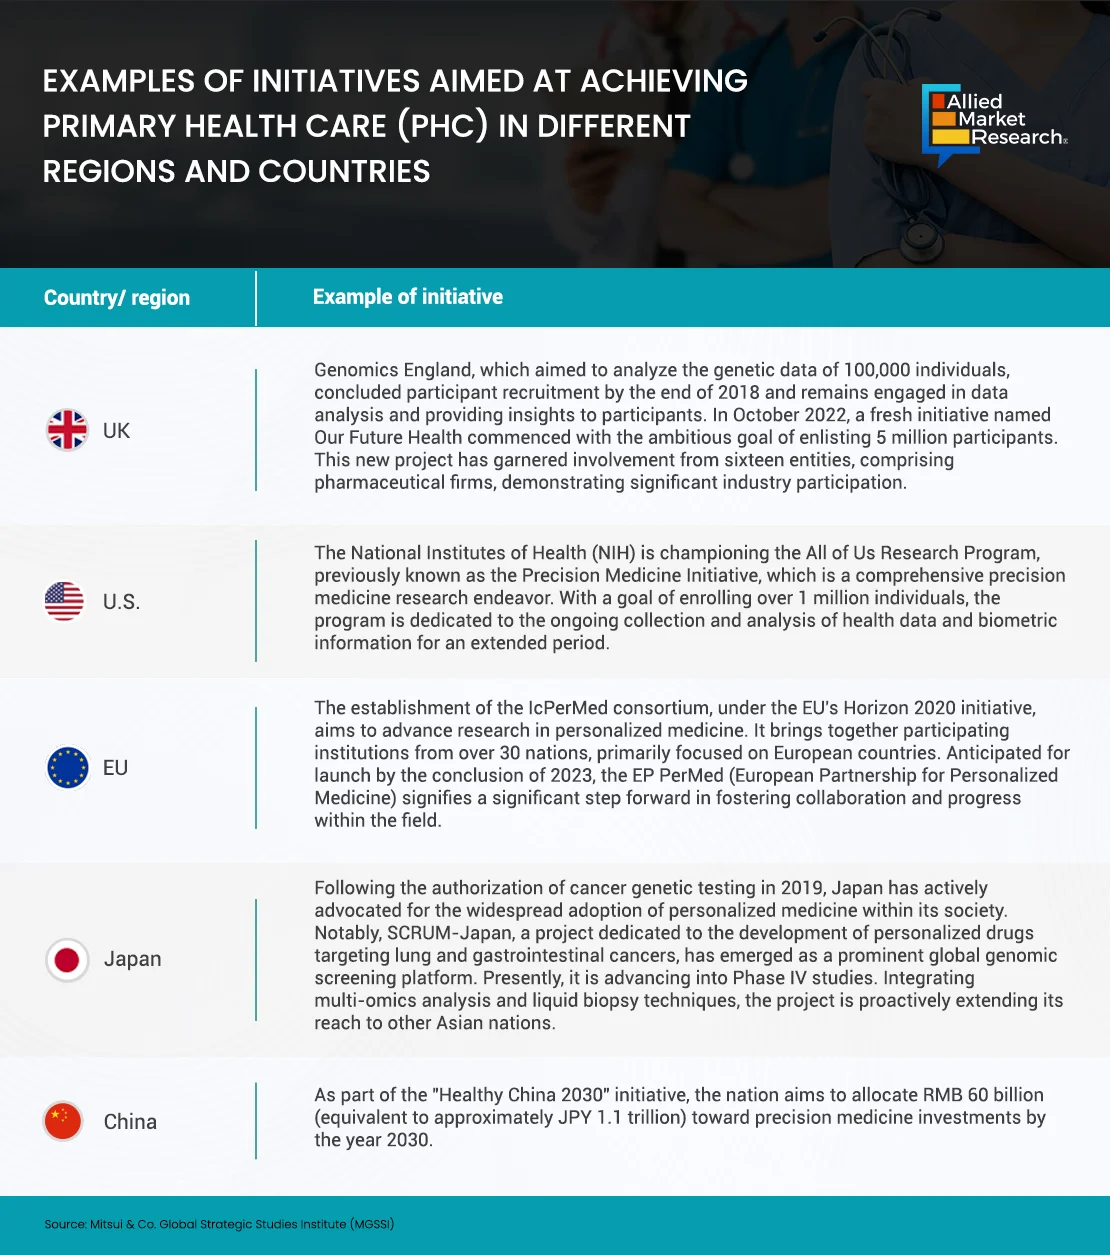 Examples of initiatives aimed at achieving primay healthcare in different regions and countries